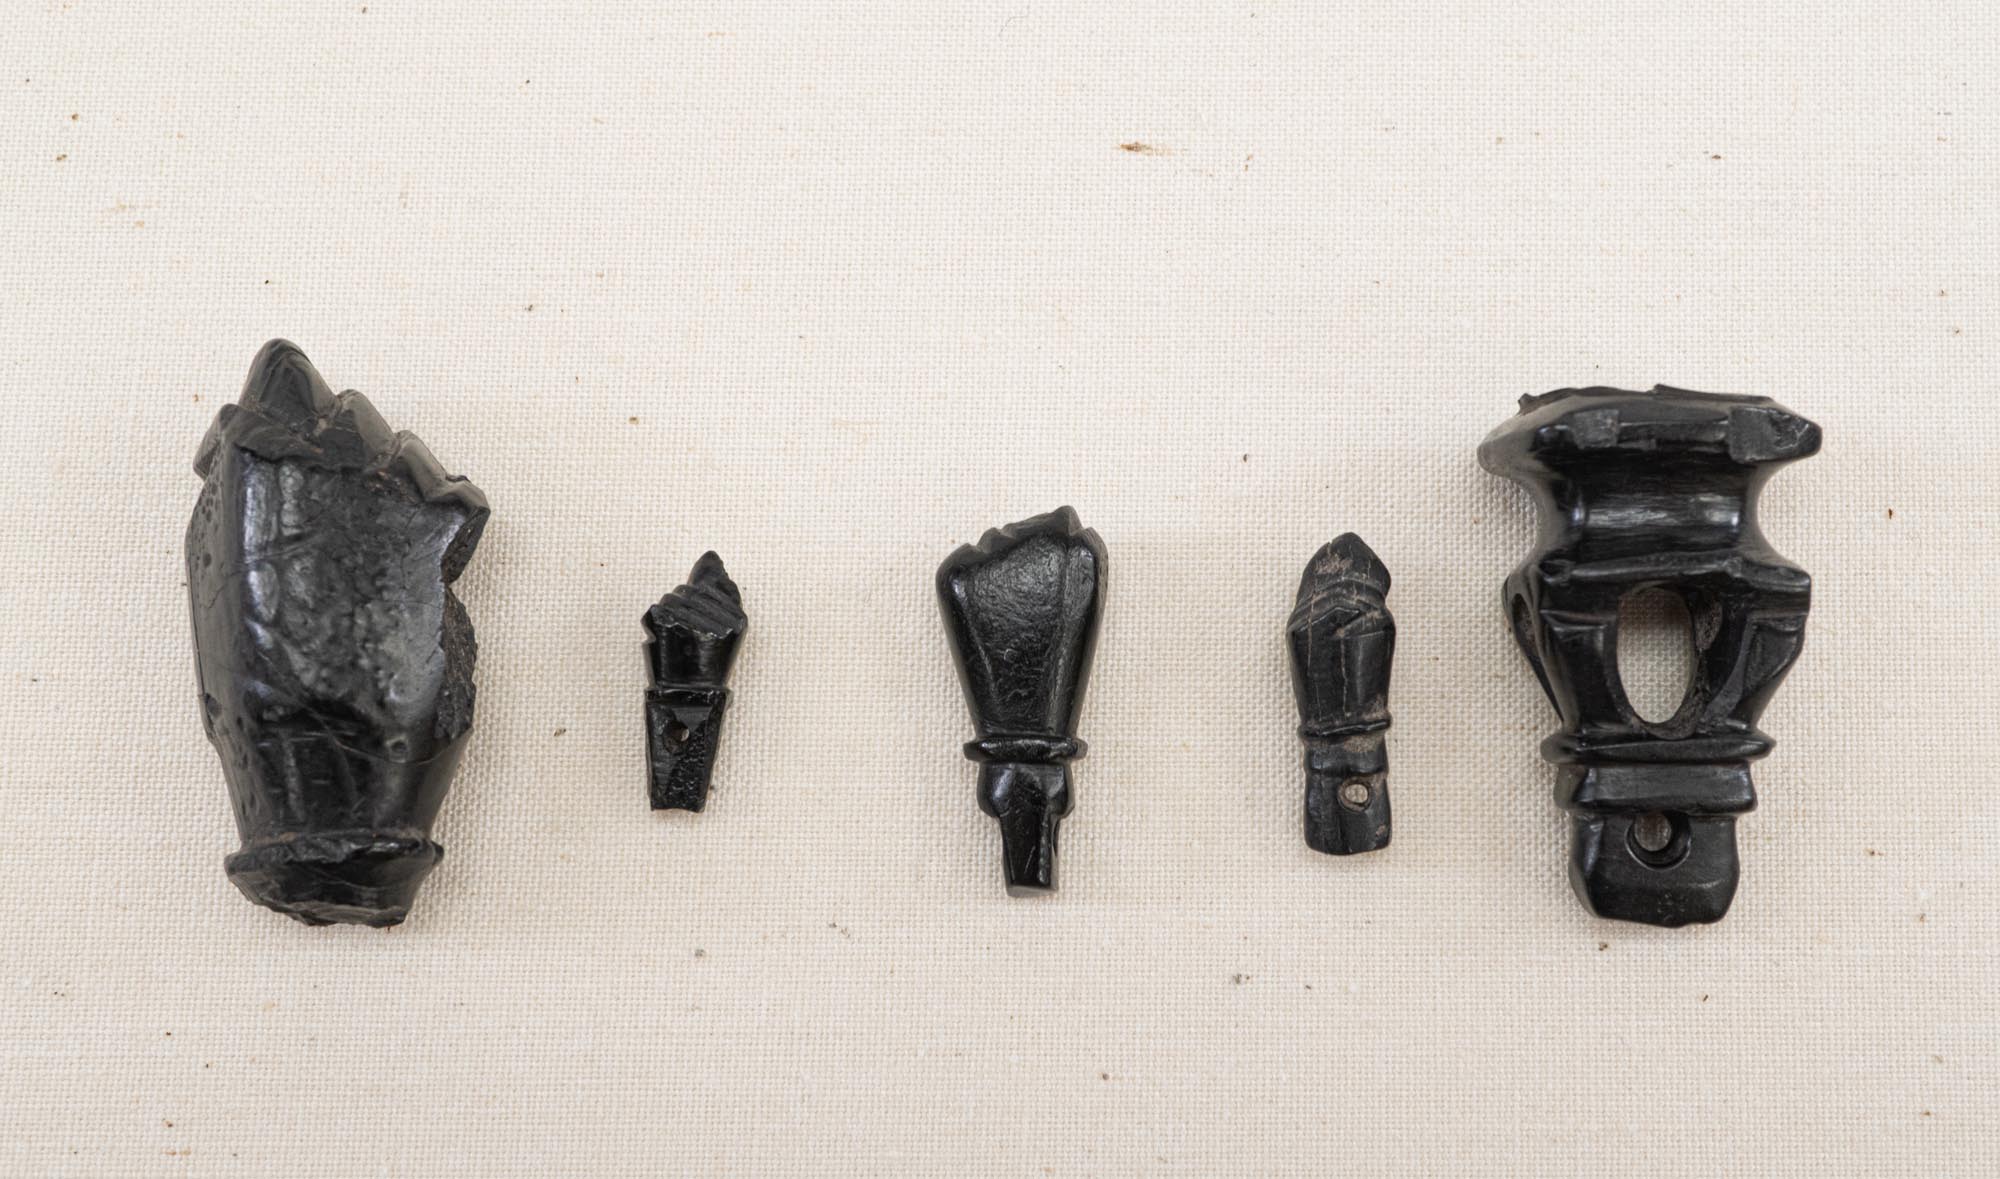 These items are mano fica amulets from the site of Presidio La Bahia on Garcitas Creek.